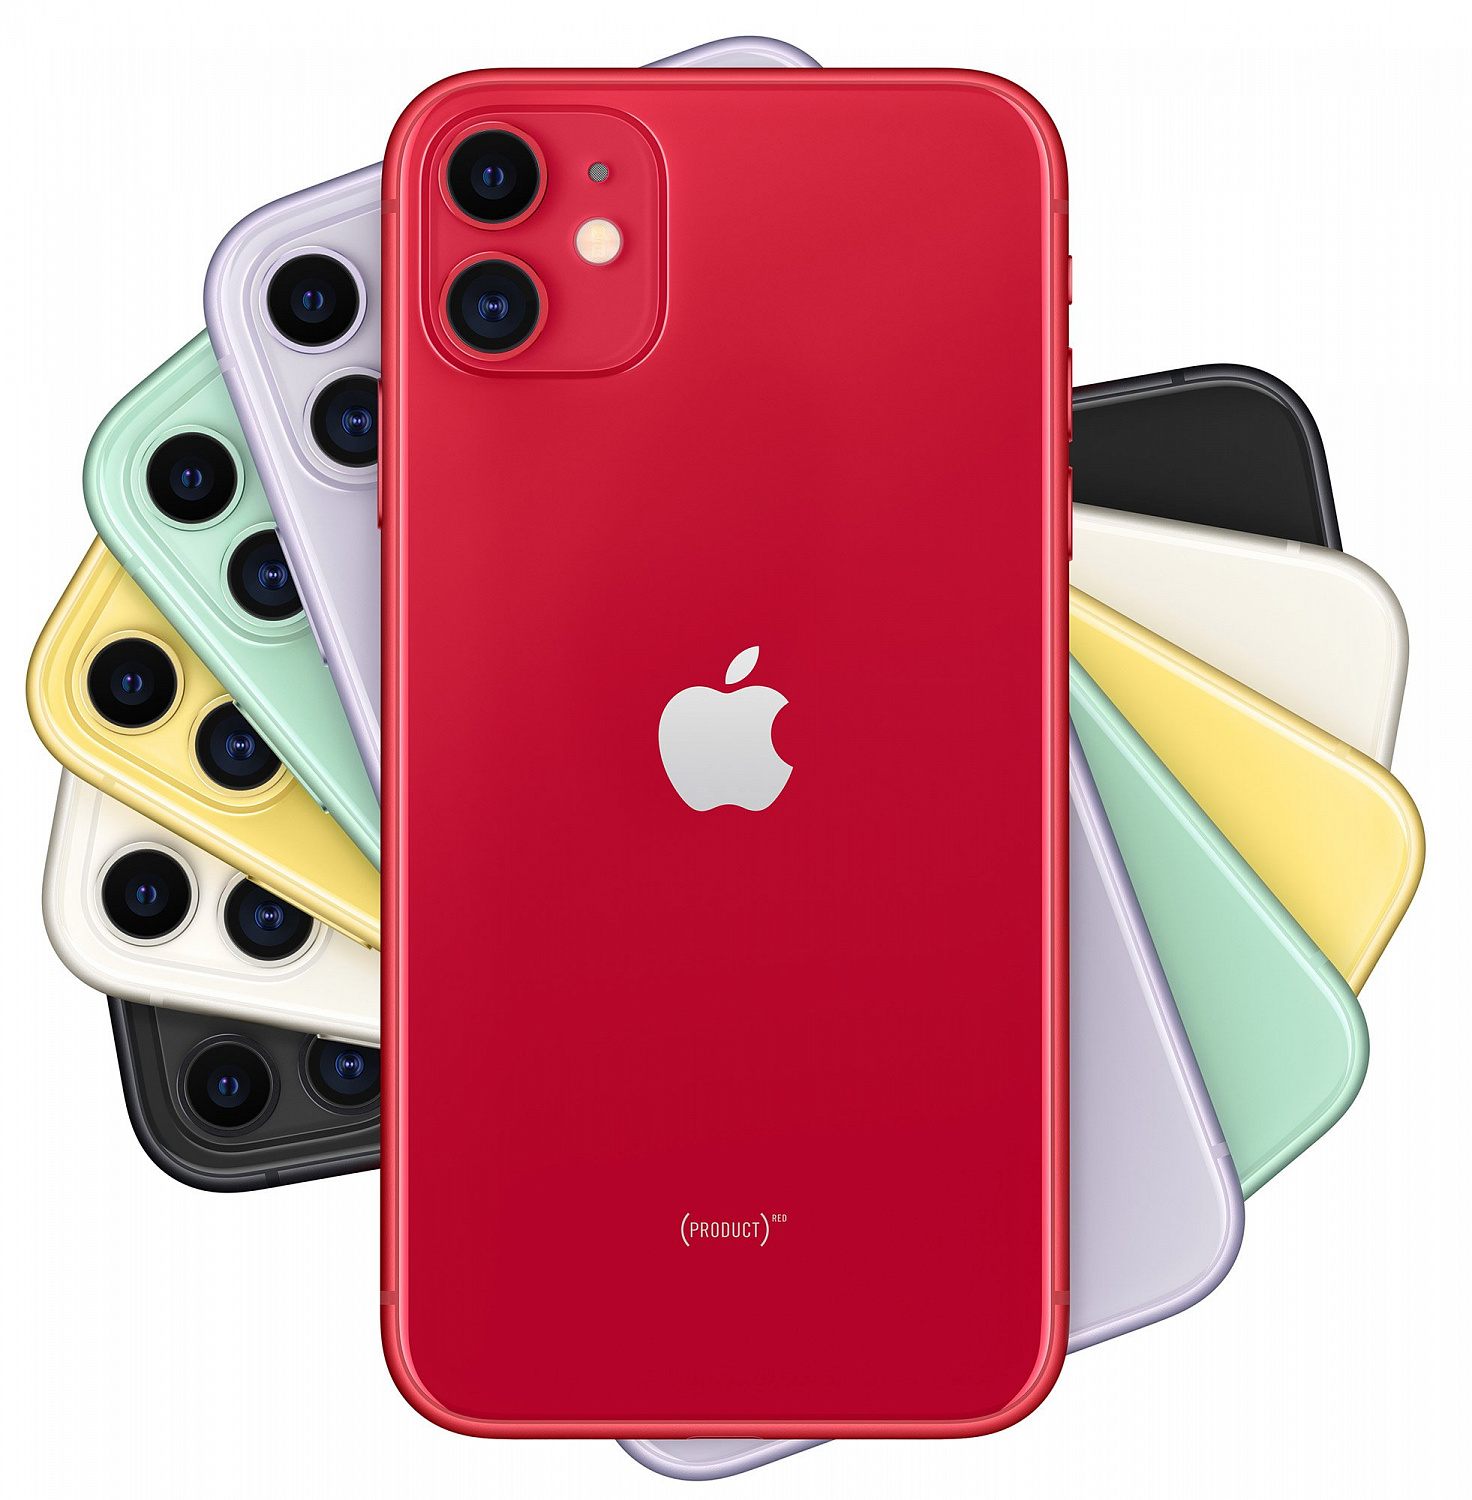 Apple iPhone 11 128GB Product Red Б/У (Grade A) - ITMag